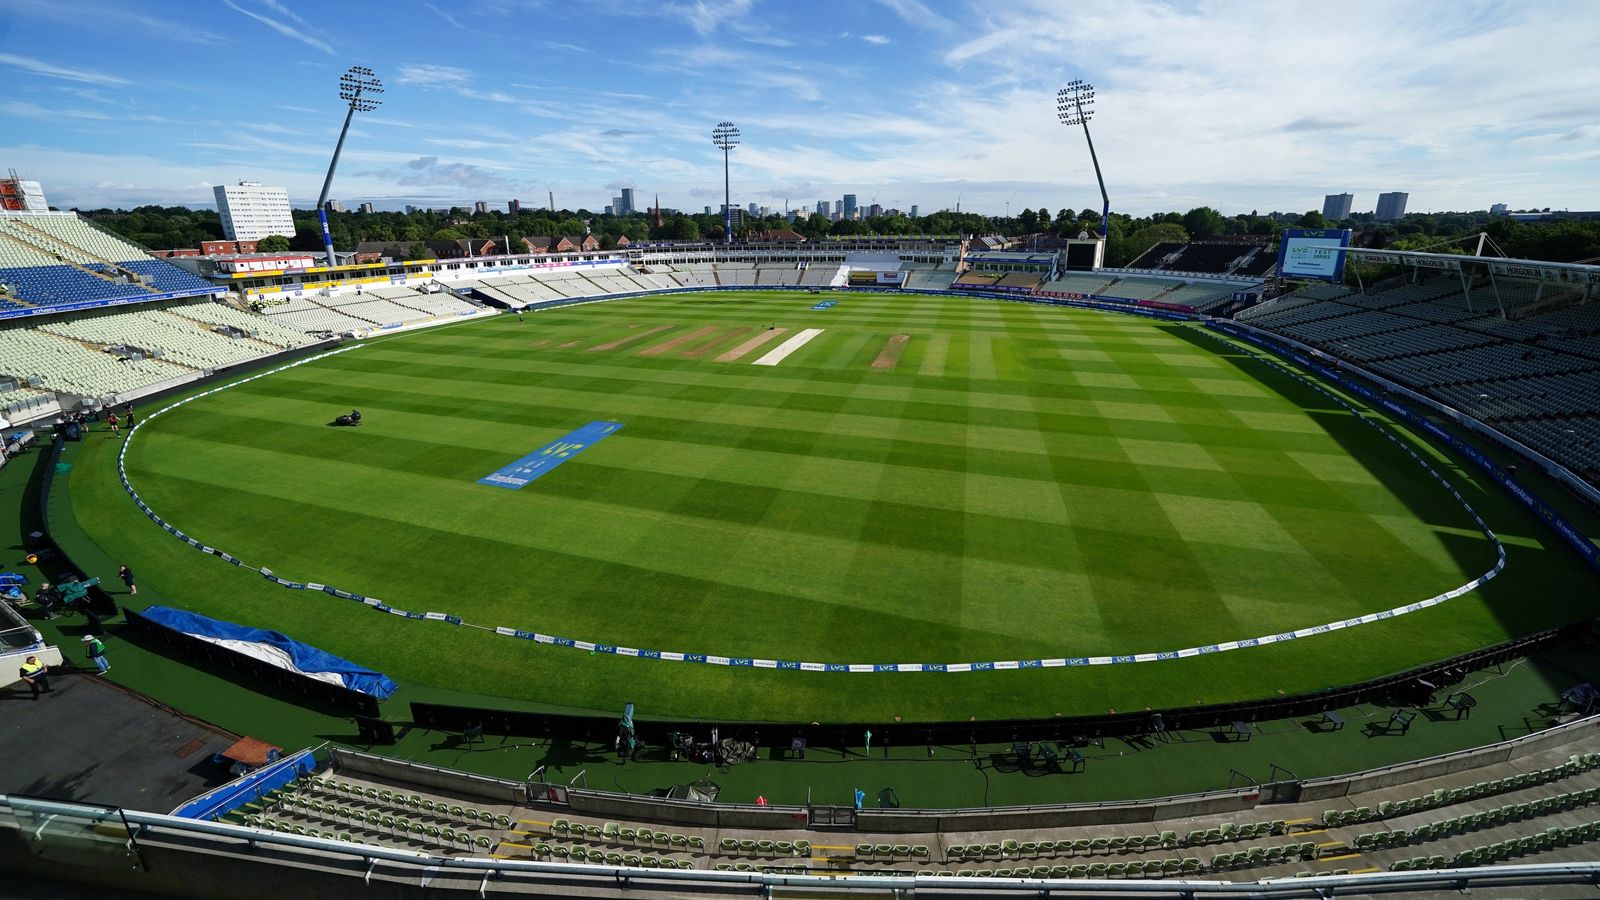 Man arrested following allegations of racism during Edgbaston Test between England and India